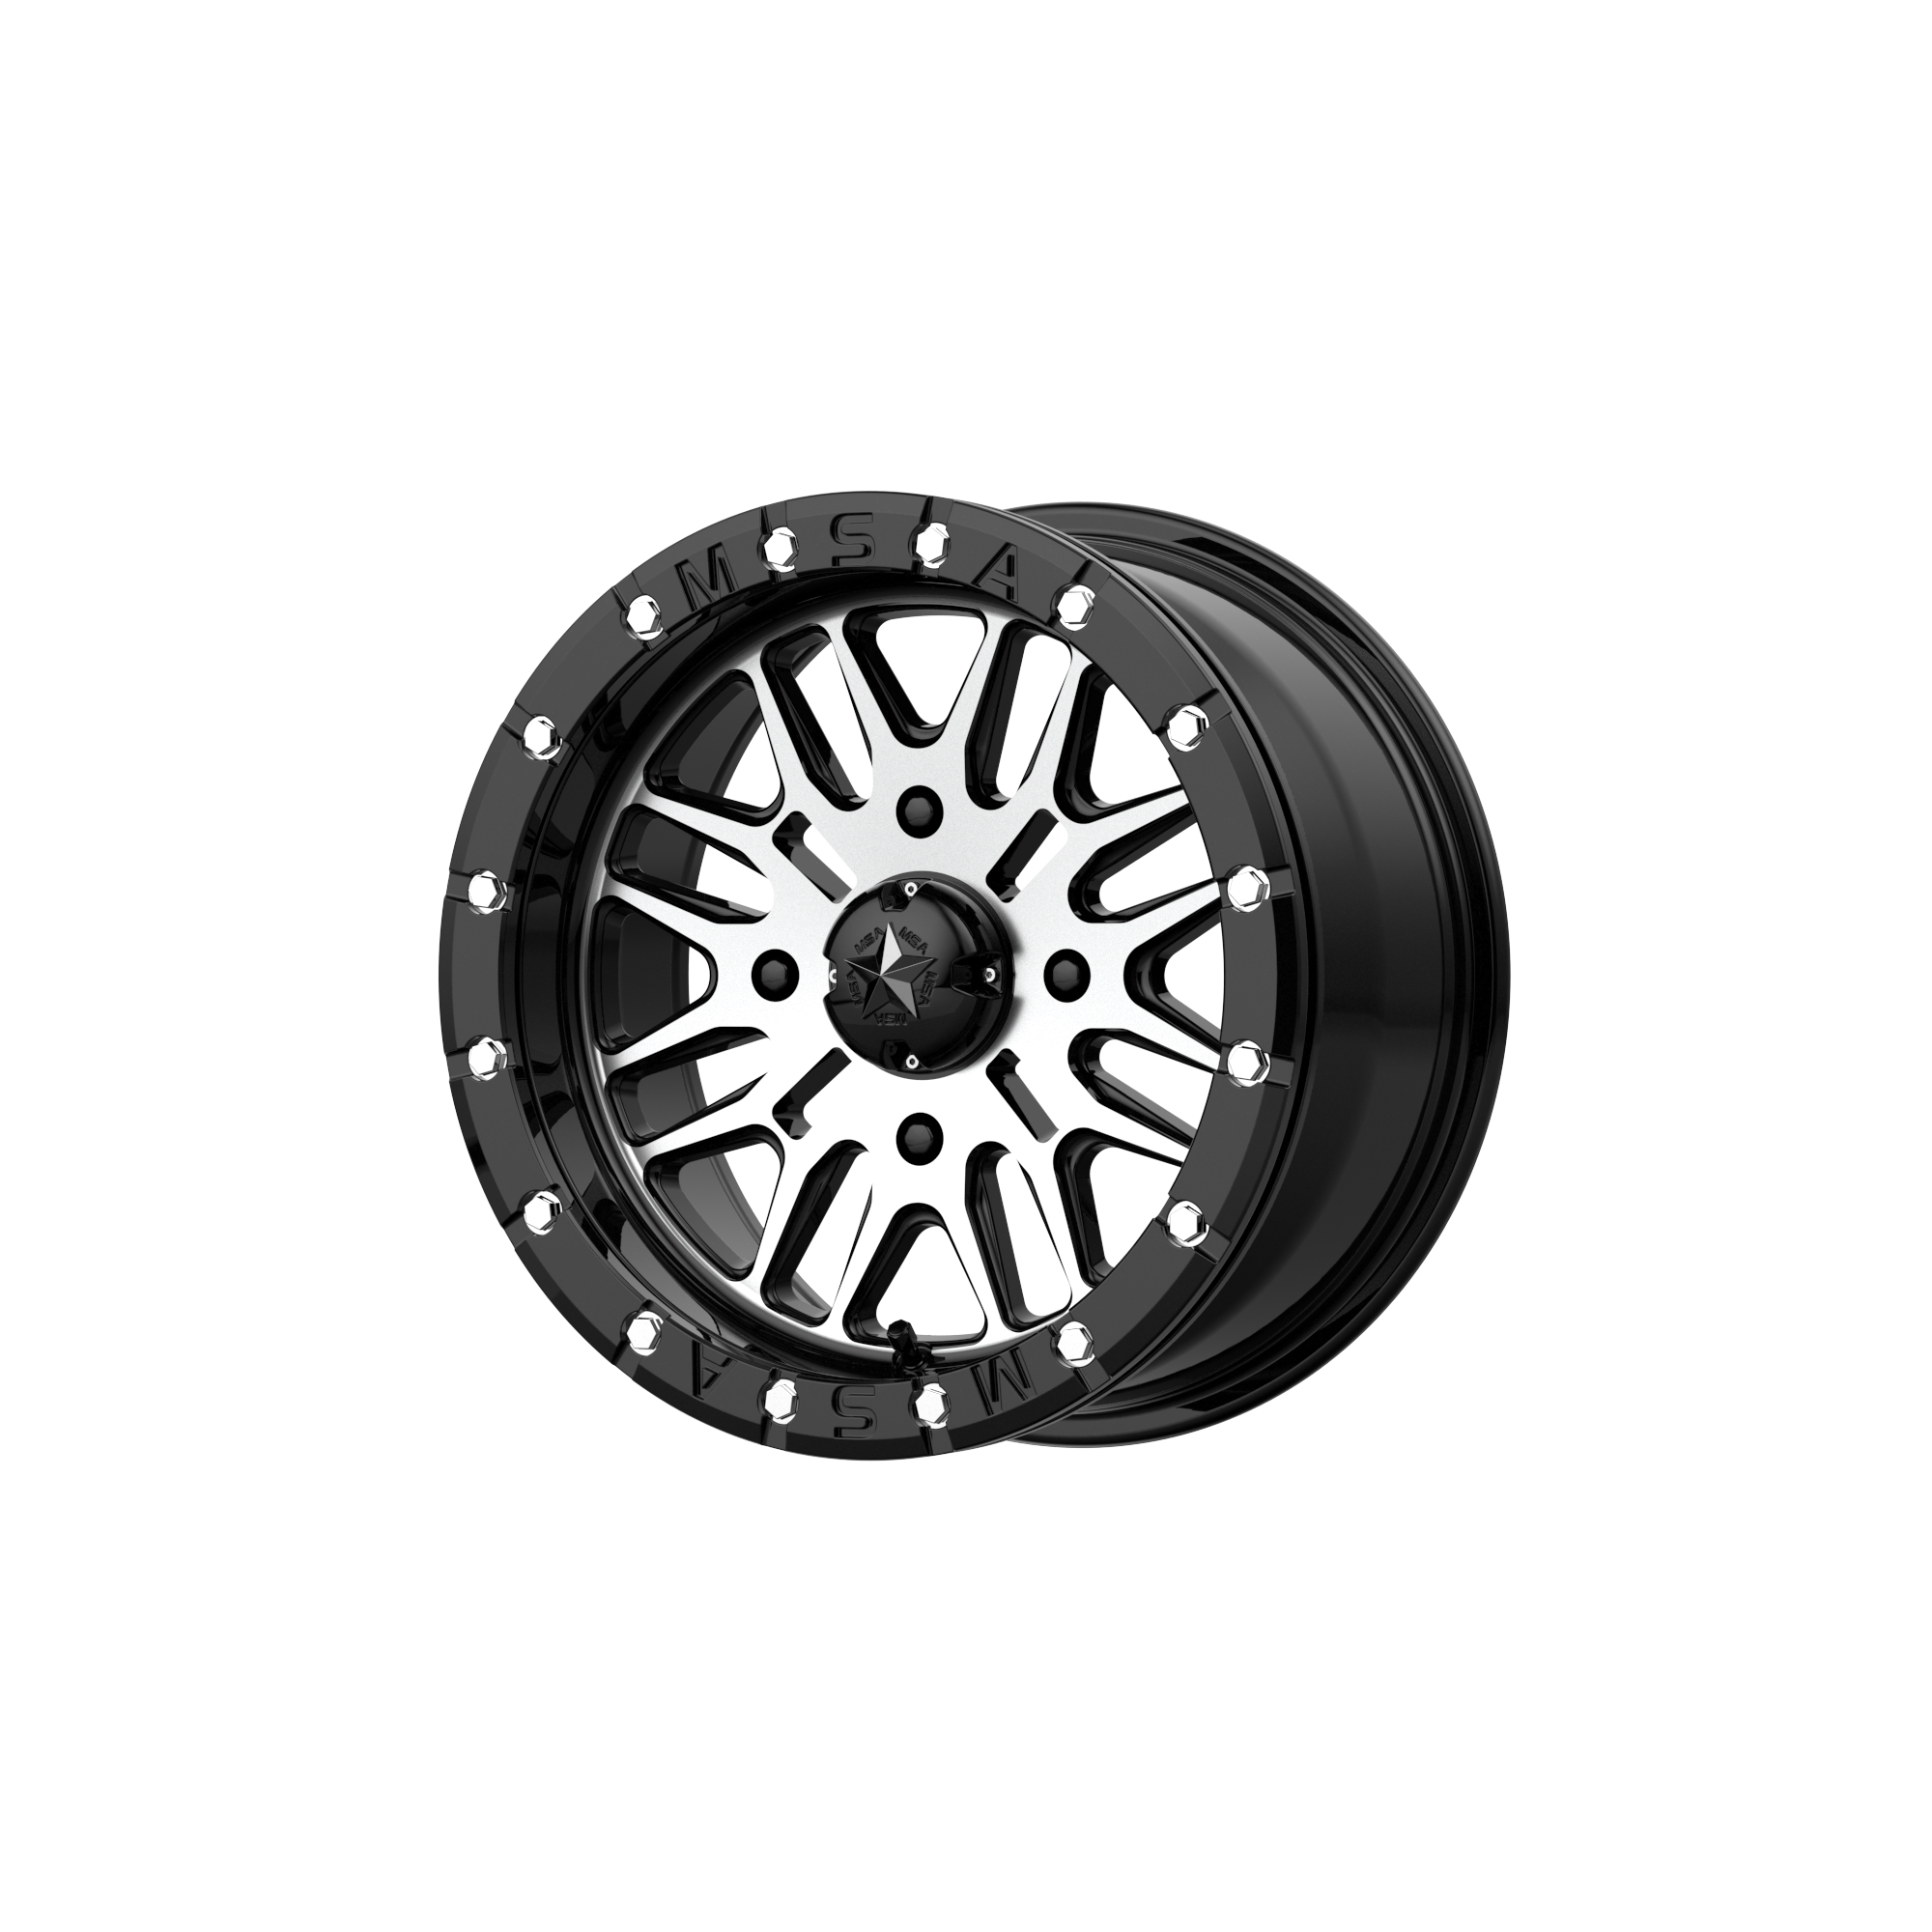 BRUTE BEADLOCK 16x7 4x156.00 GLOSS BLACK MACHINED (10 mm) - Tires and Engine Performance